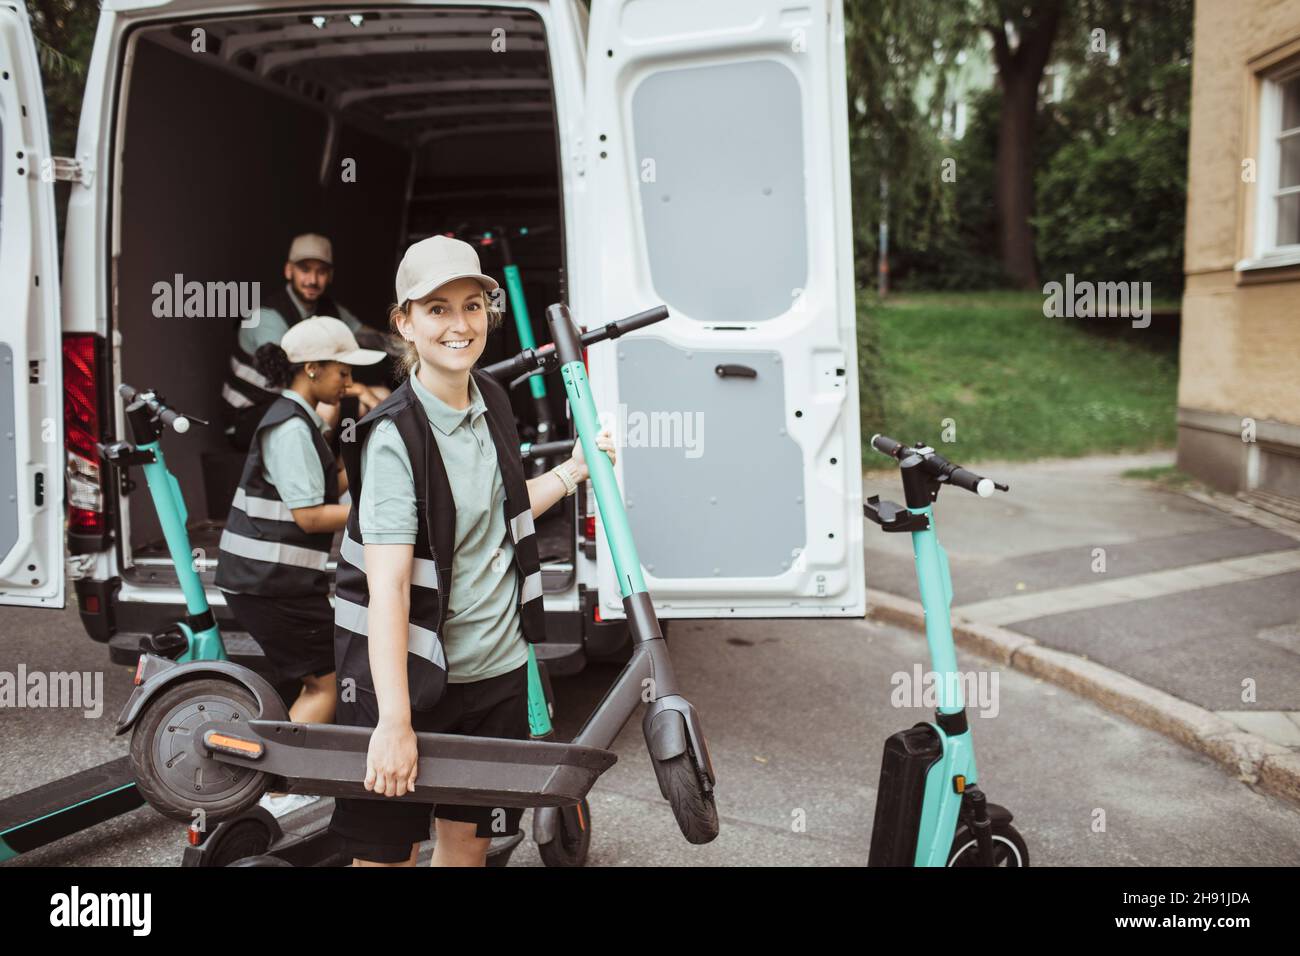 Young deliver woman carrying push scooter while helping male and female coworkers loading van Stock Photo